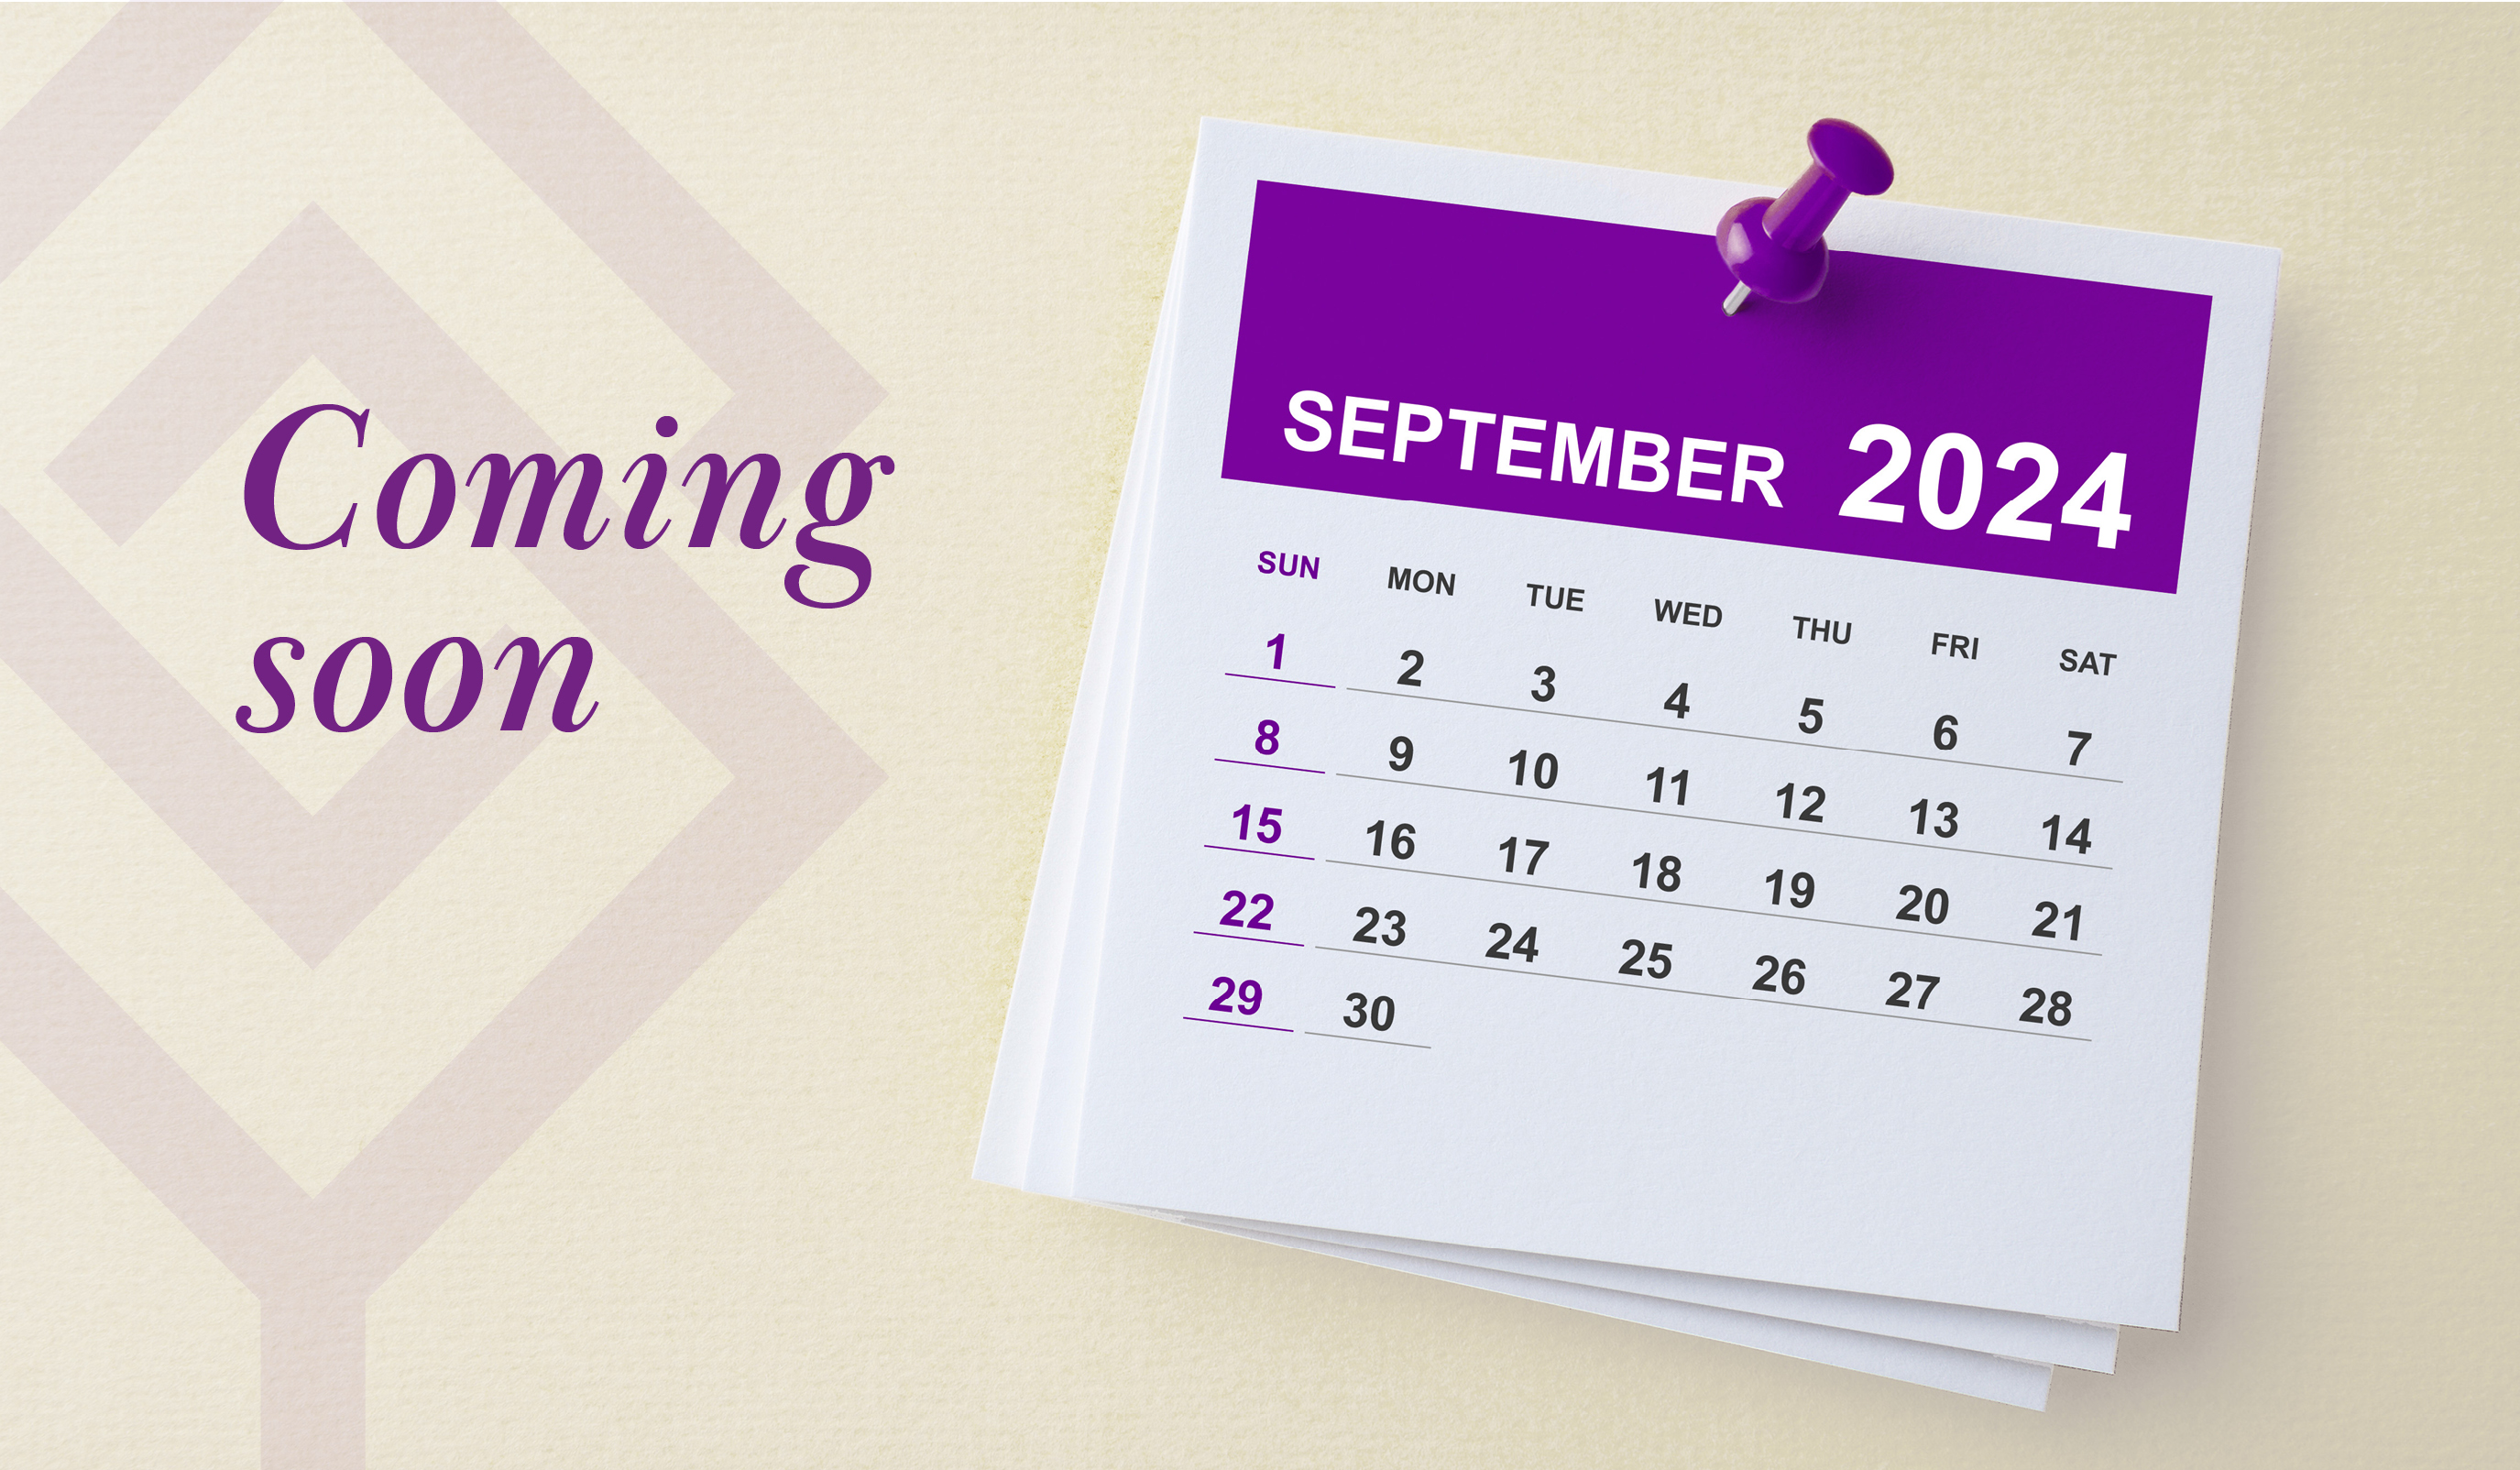 "Coming Soon" with a calendar on September 2024